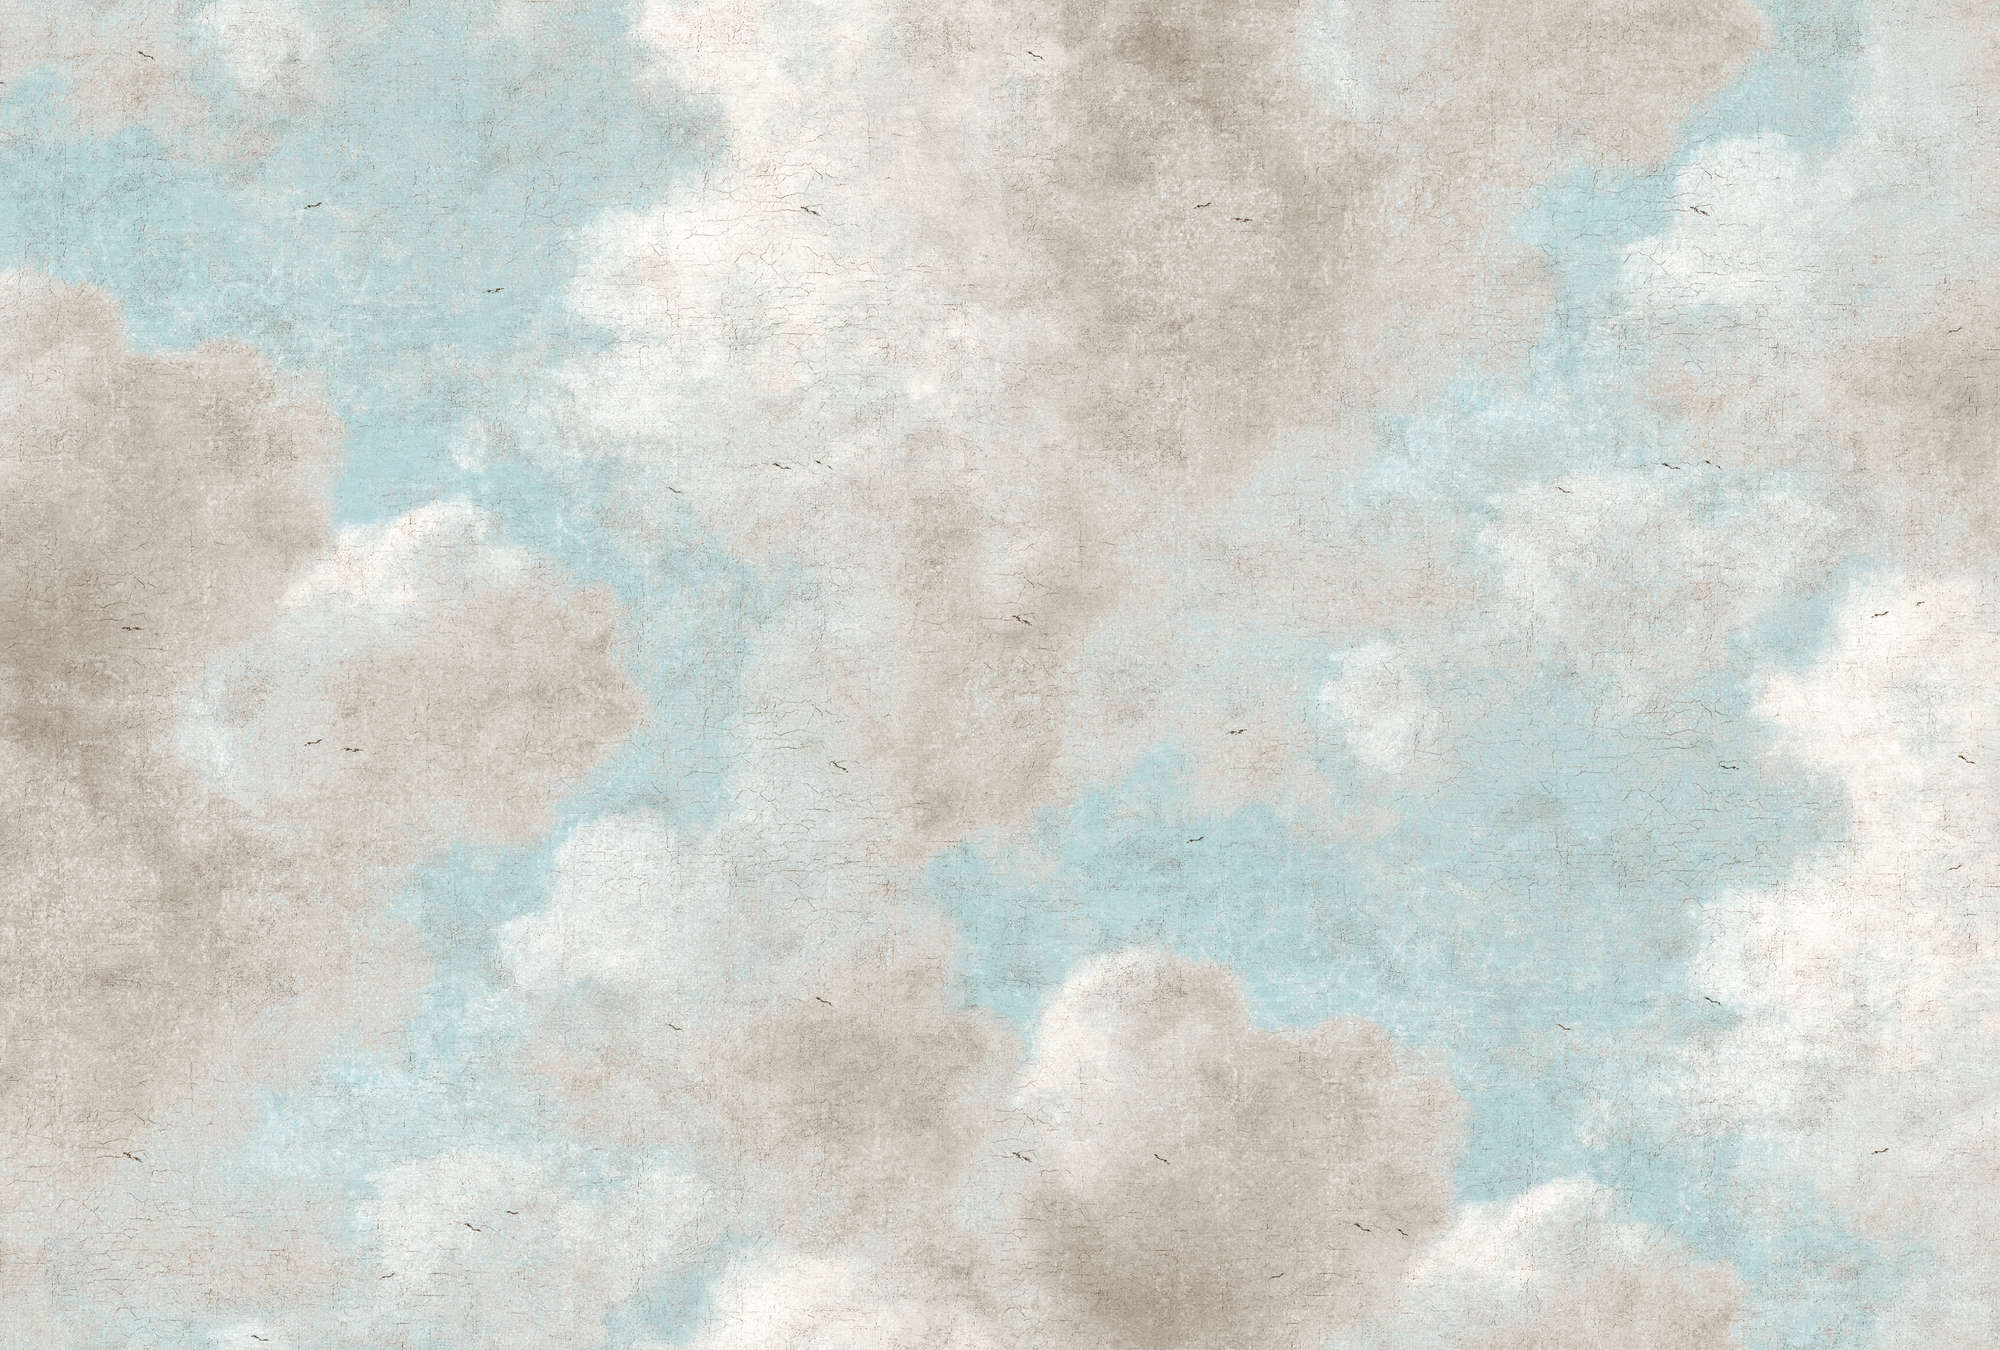             Photo wallpaper clouds, blue sky in oil painting style - grey, blue
        